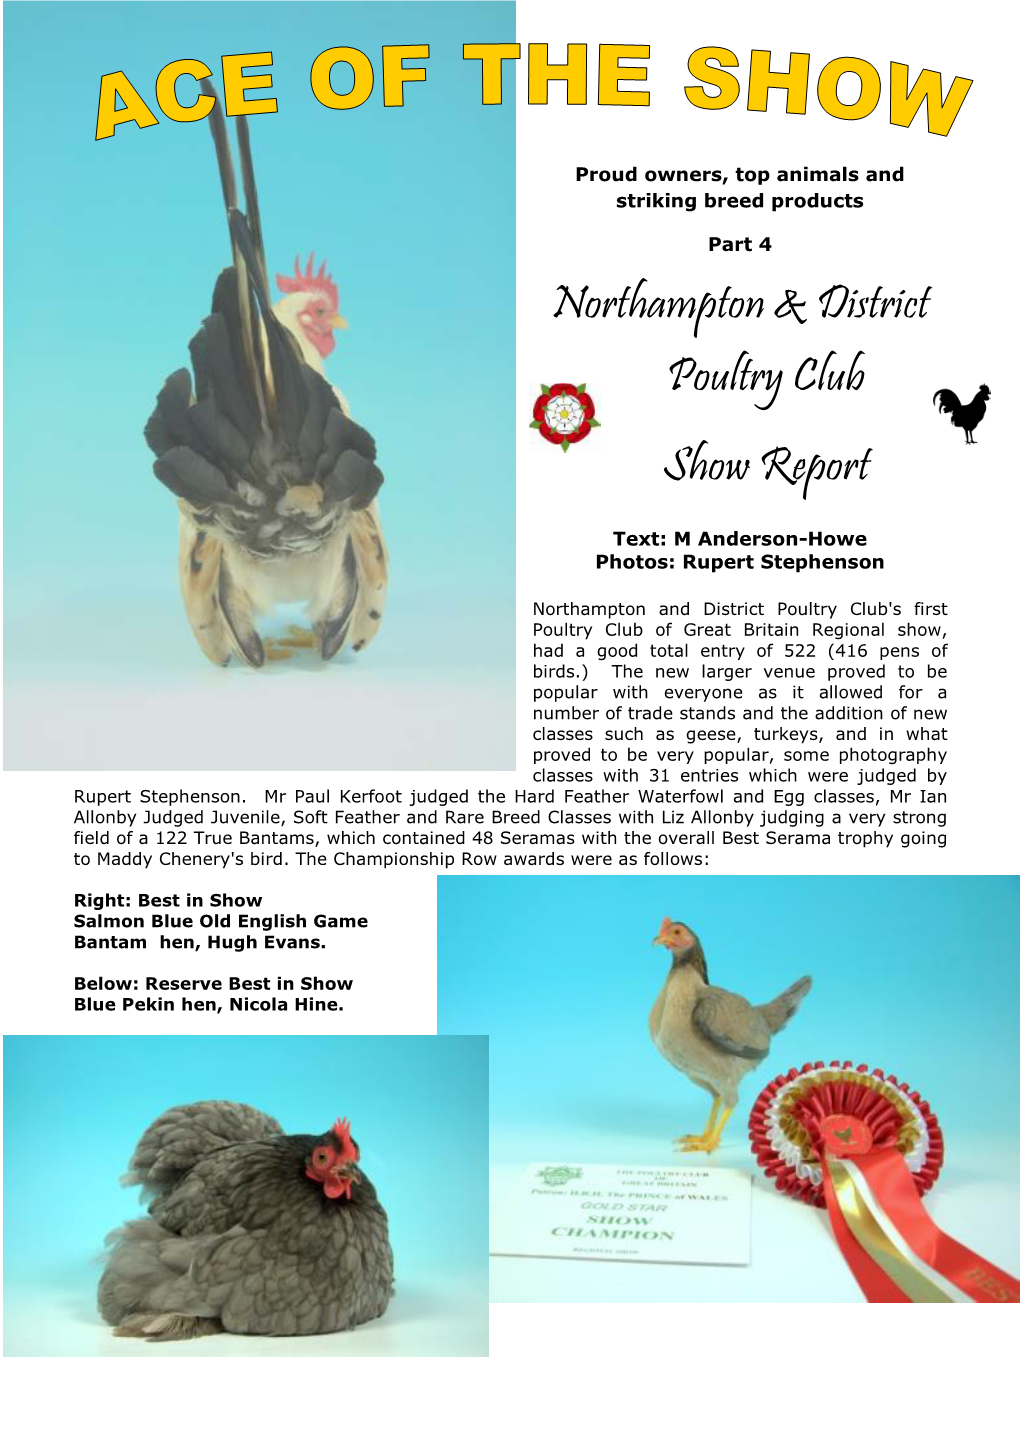 Northampton & District Poultry Club Show Report